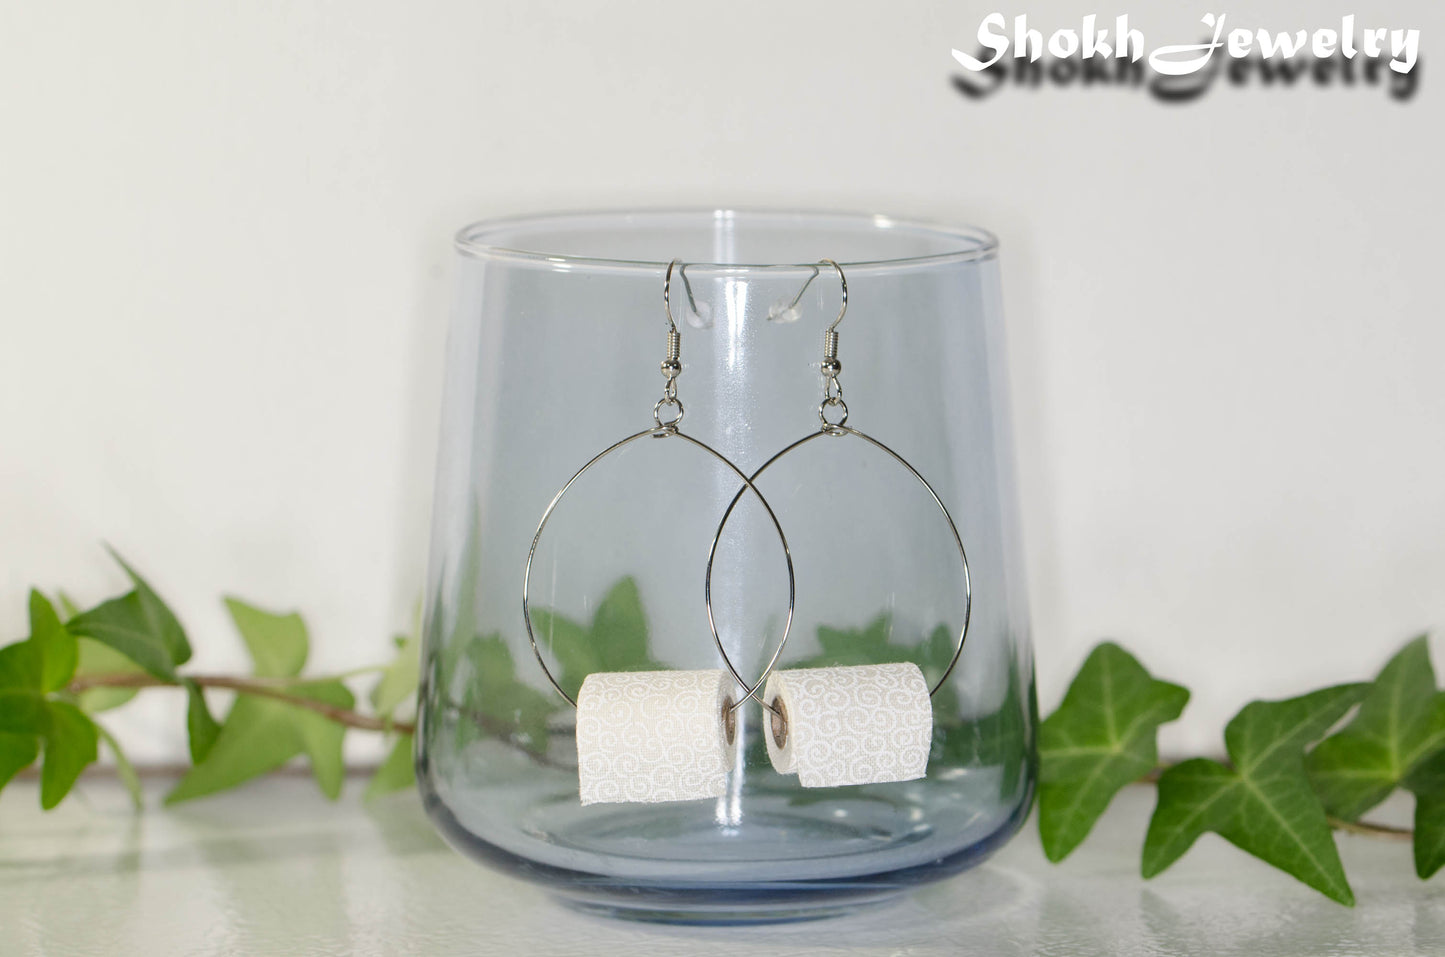 Miniature Toilet Paper Roll Earrings displayed on a glass.